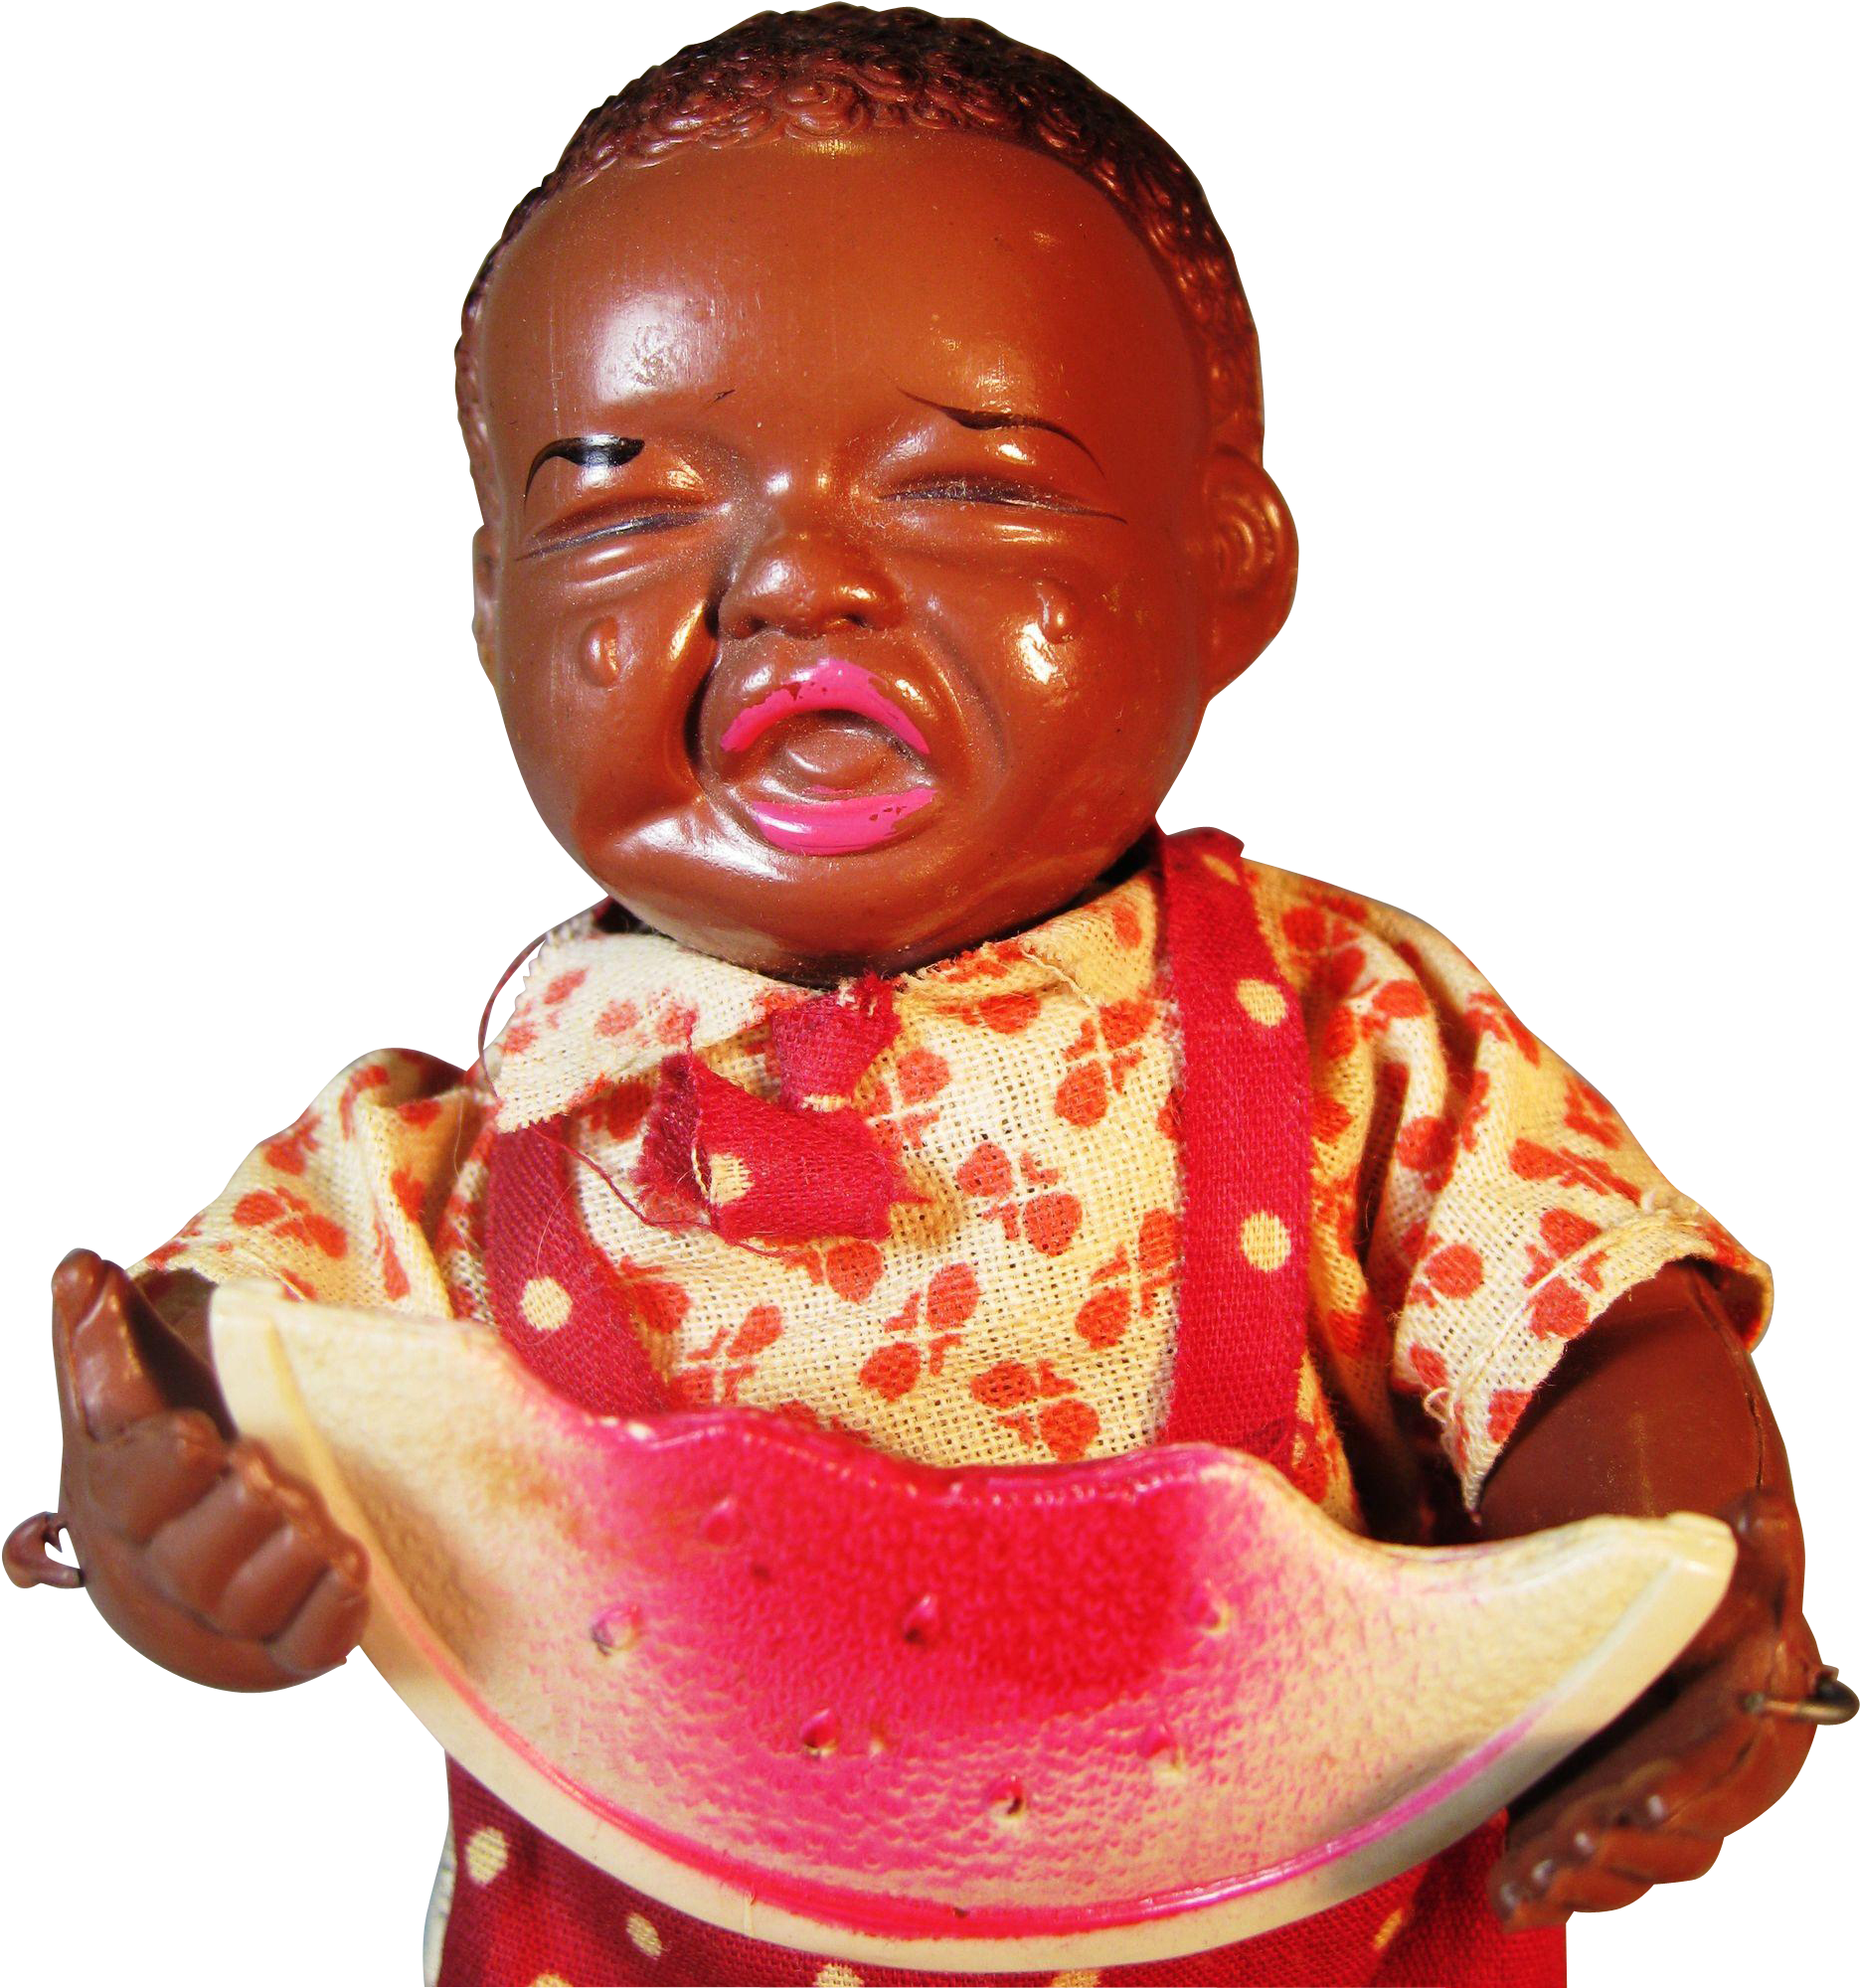 Vintage Crying Doll With Watermelon Slice PNG